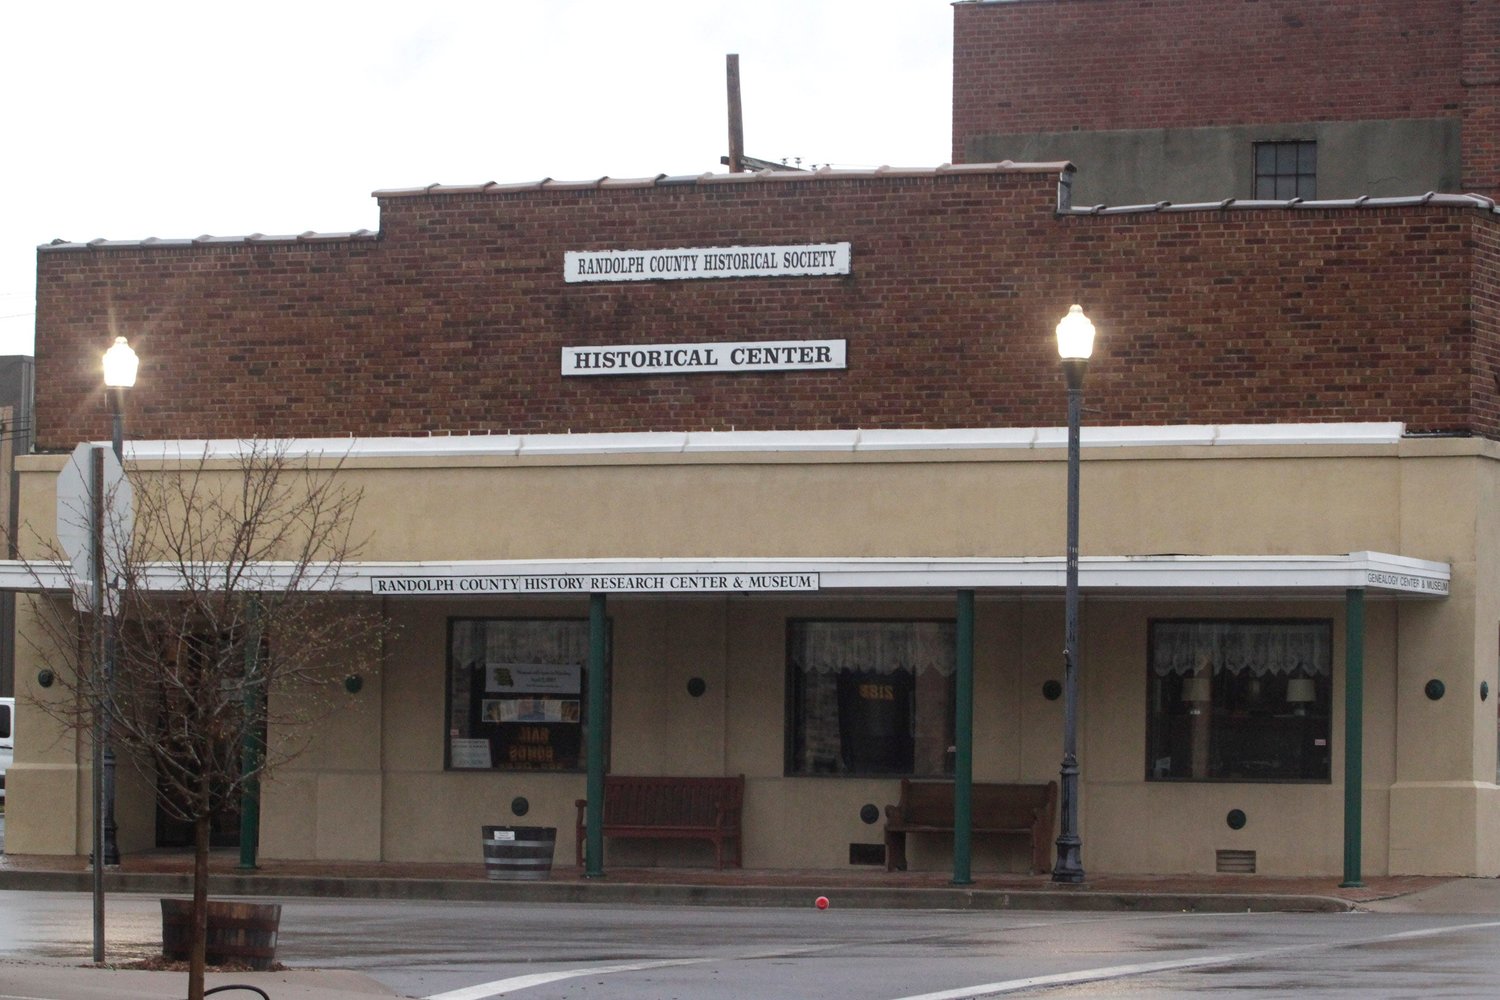 The Randolph County Historical Museum and Genealogy Center located at 223 N. Clark St., Moberly, will re-open its doors for the public come April 5 during certain hours on Mondays, Thursdays and Saturdays. Phone is 263-9396.